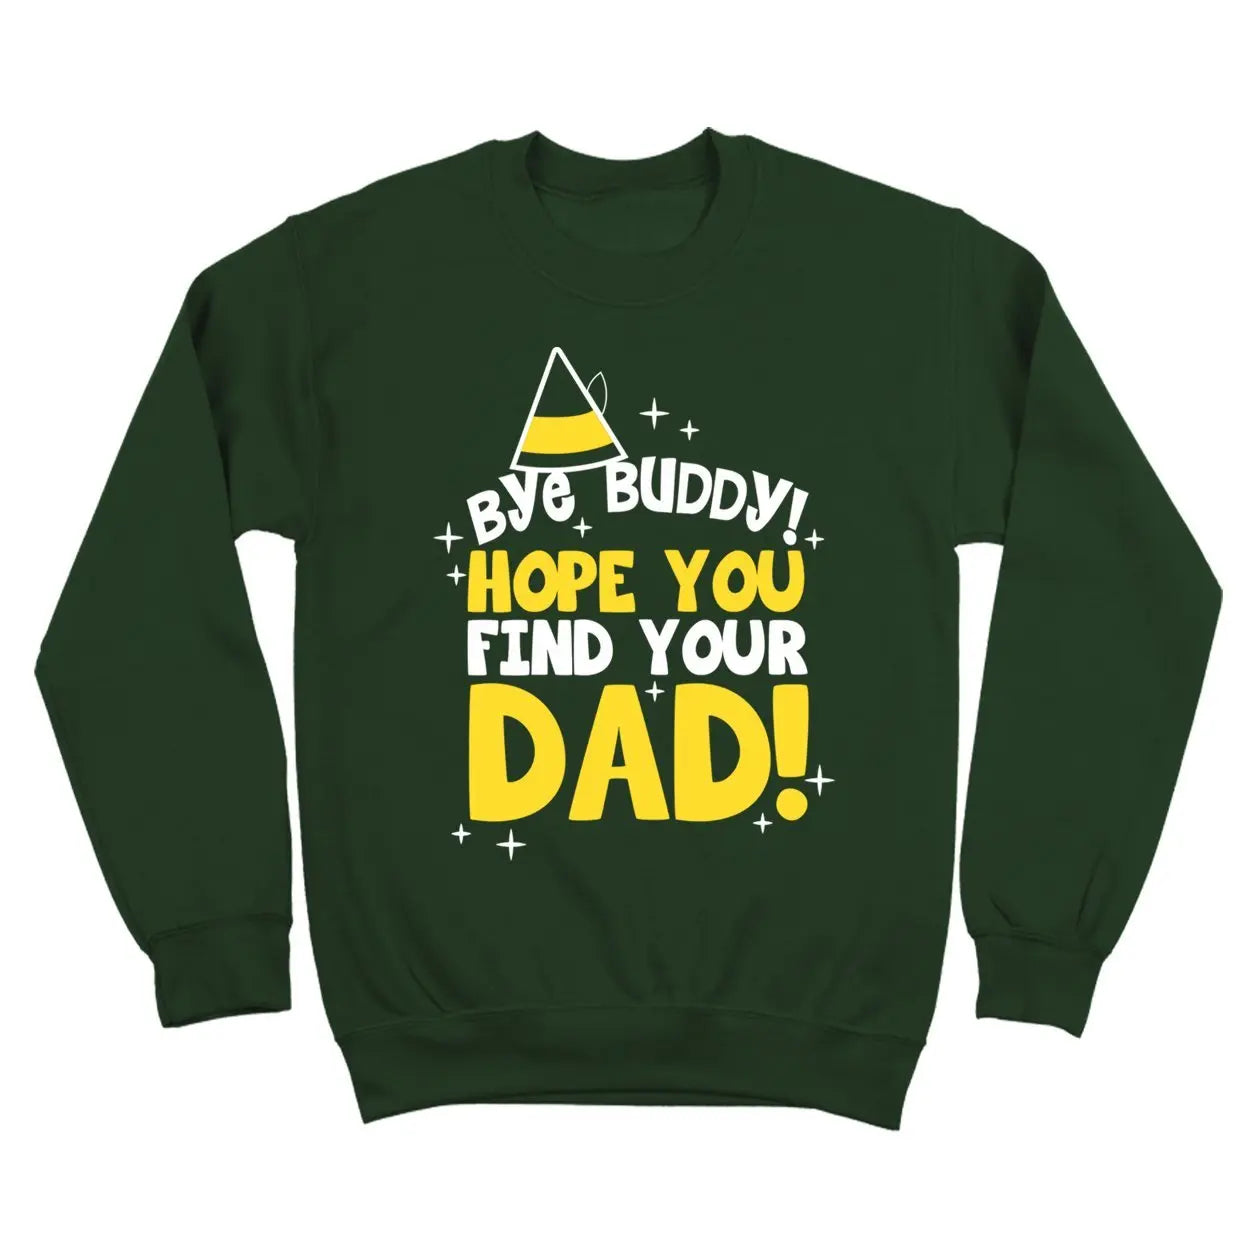 Bye Buddy Hope You Find Your Dad Tshirt - Donkey Tees